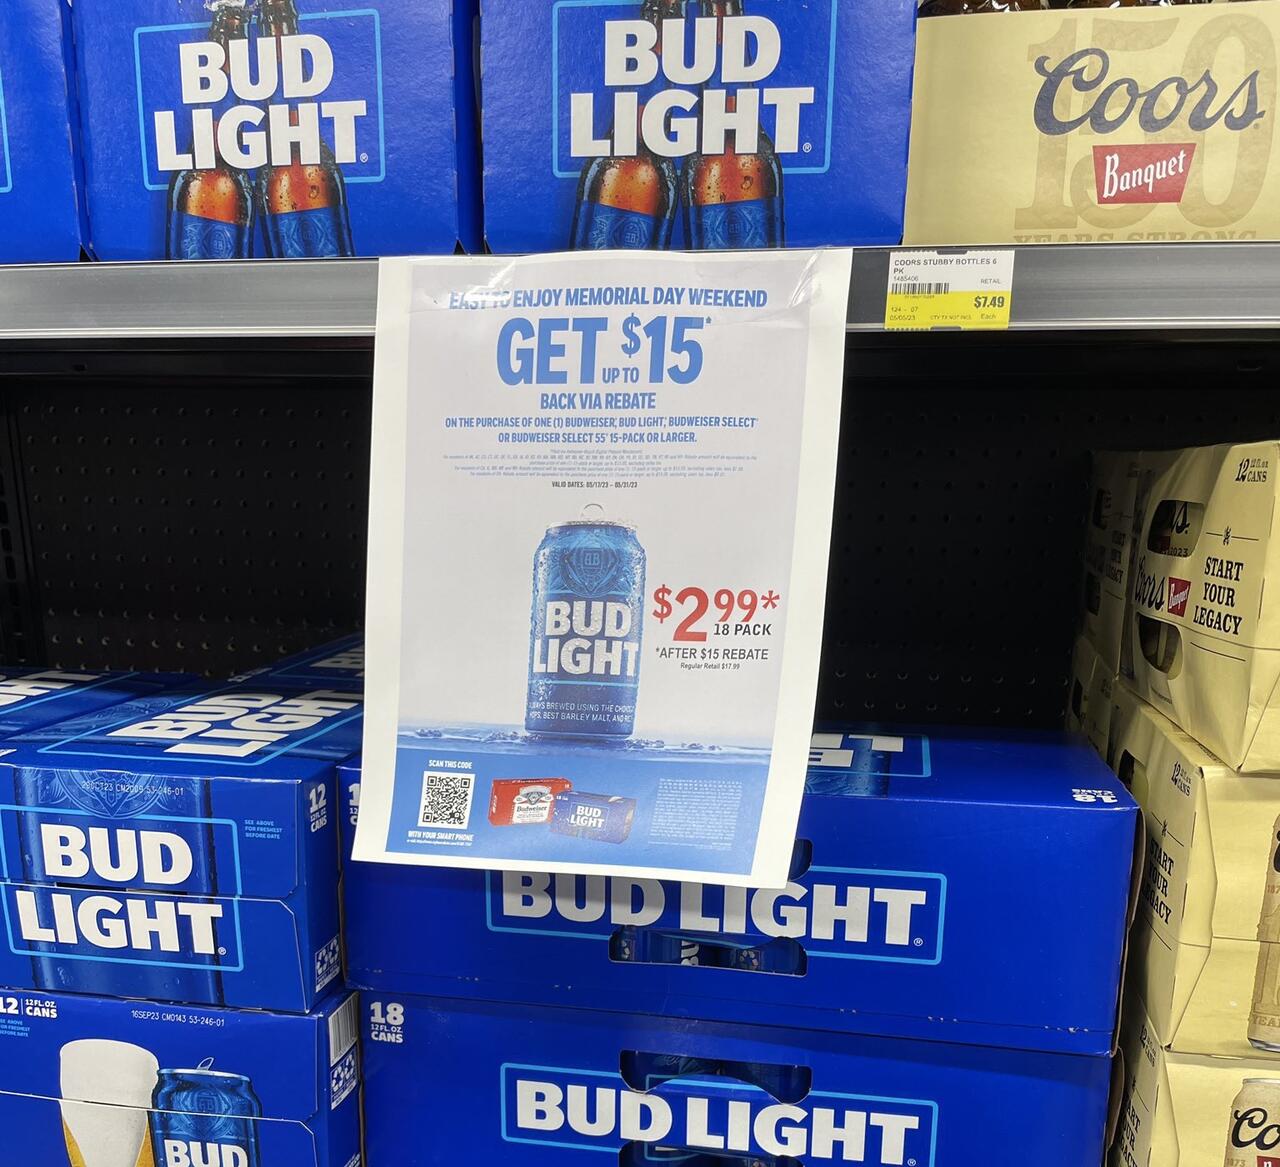 bud-light-offers-2-99-18-pack-after-sales-tumble-accelerates-zerohedge